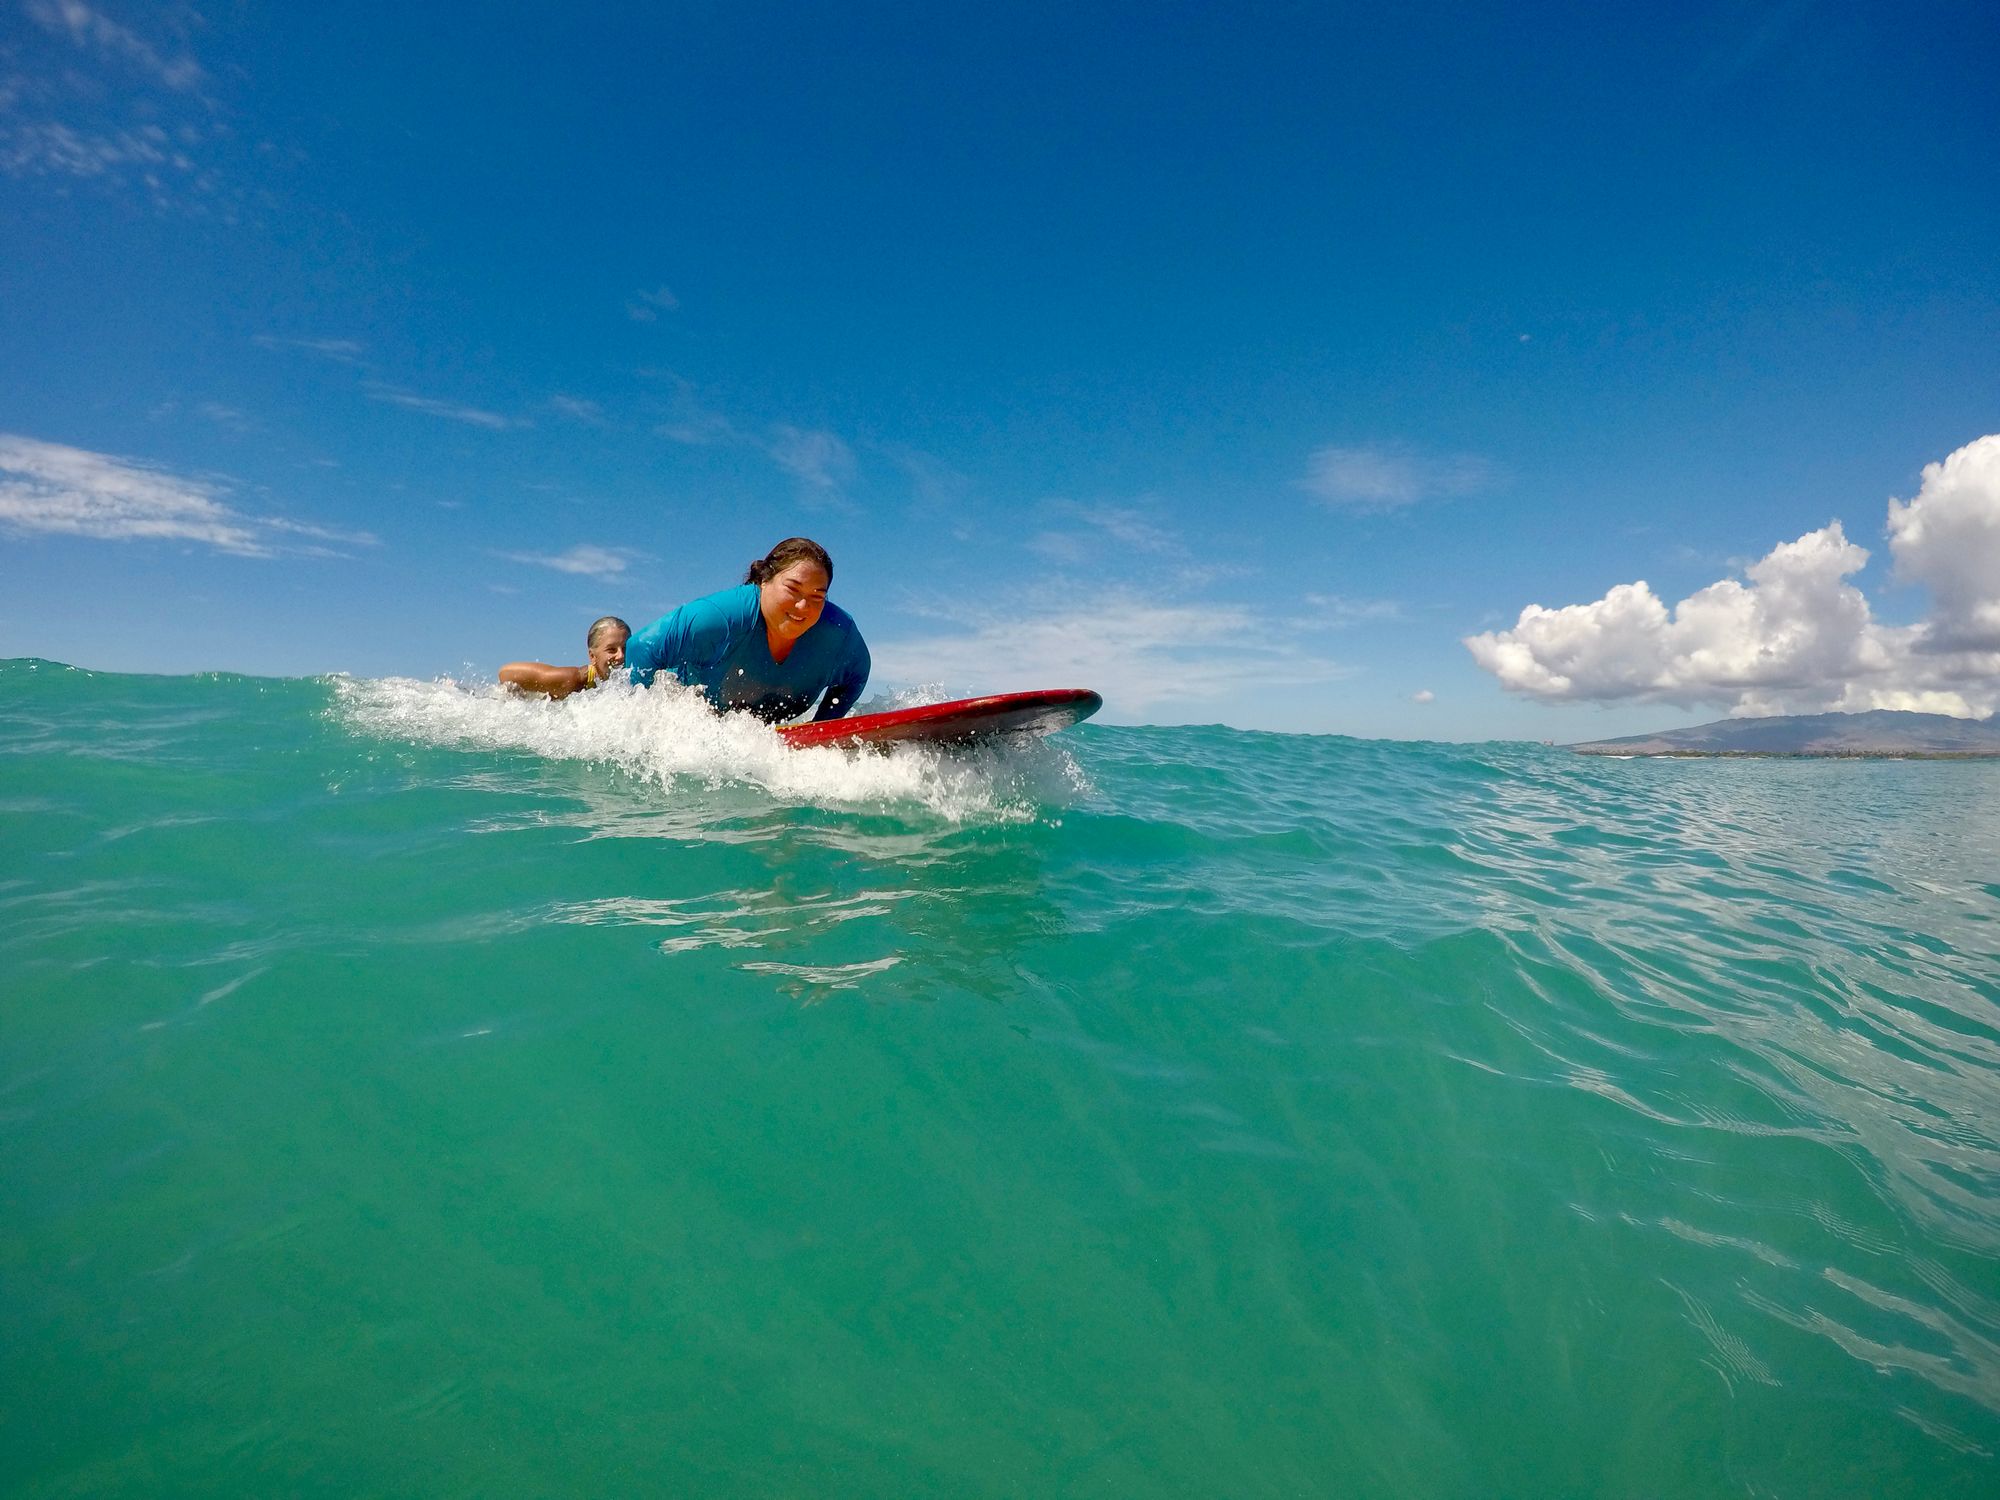 Hawaii has adaptive surfing for those with disabilities.